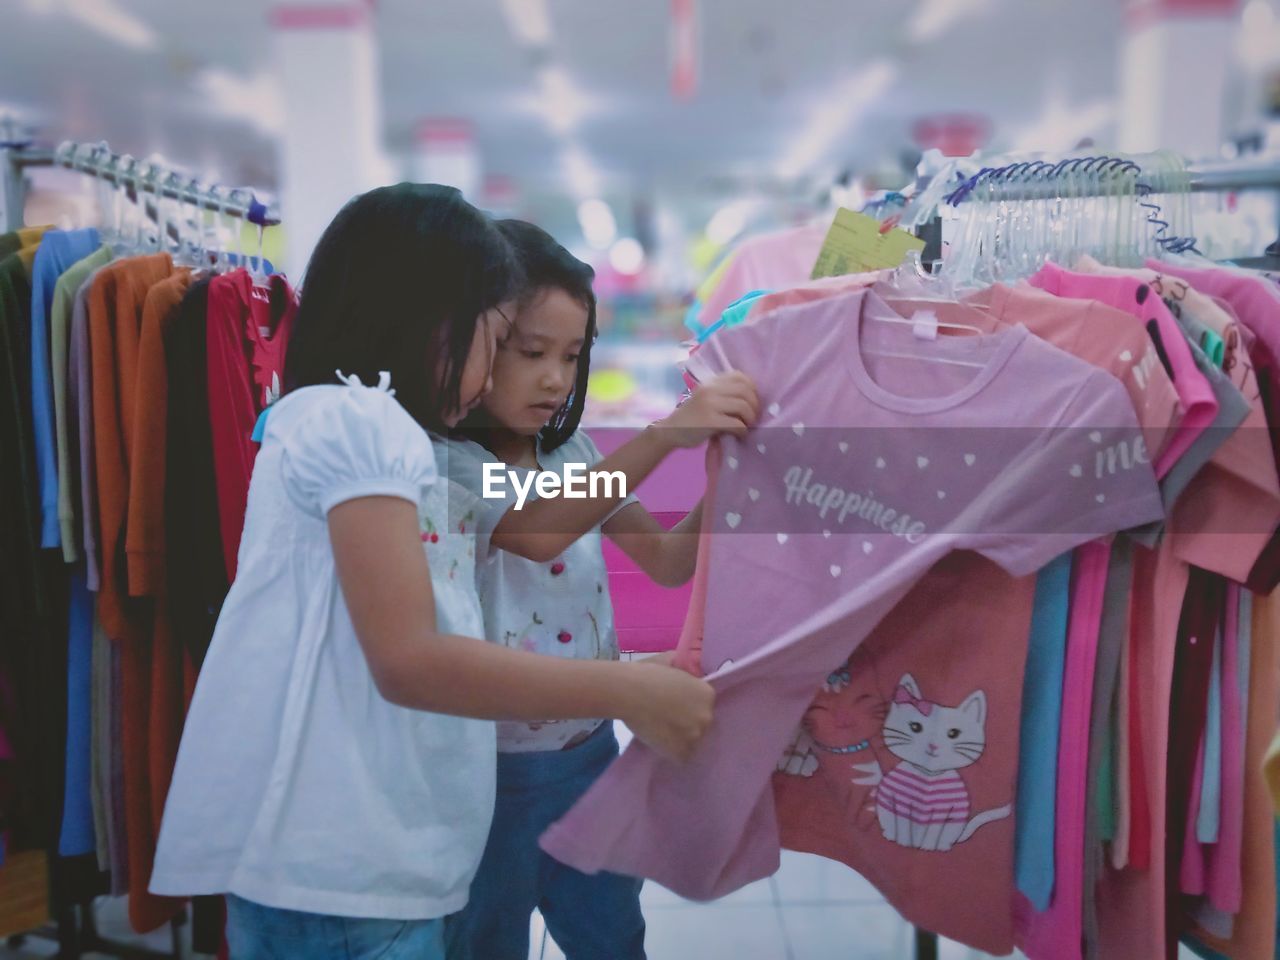 Little girls taking a look on beautiful children's clothes to choose at a supermarket.